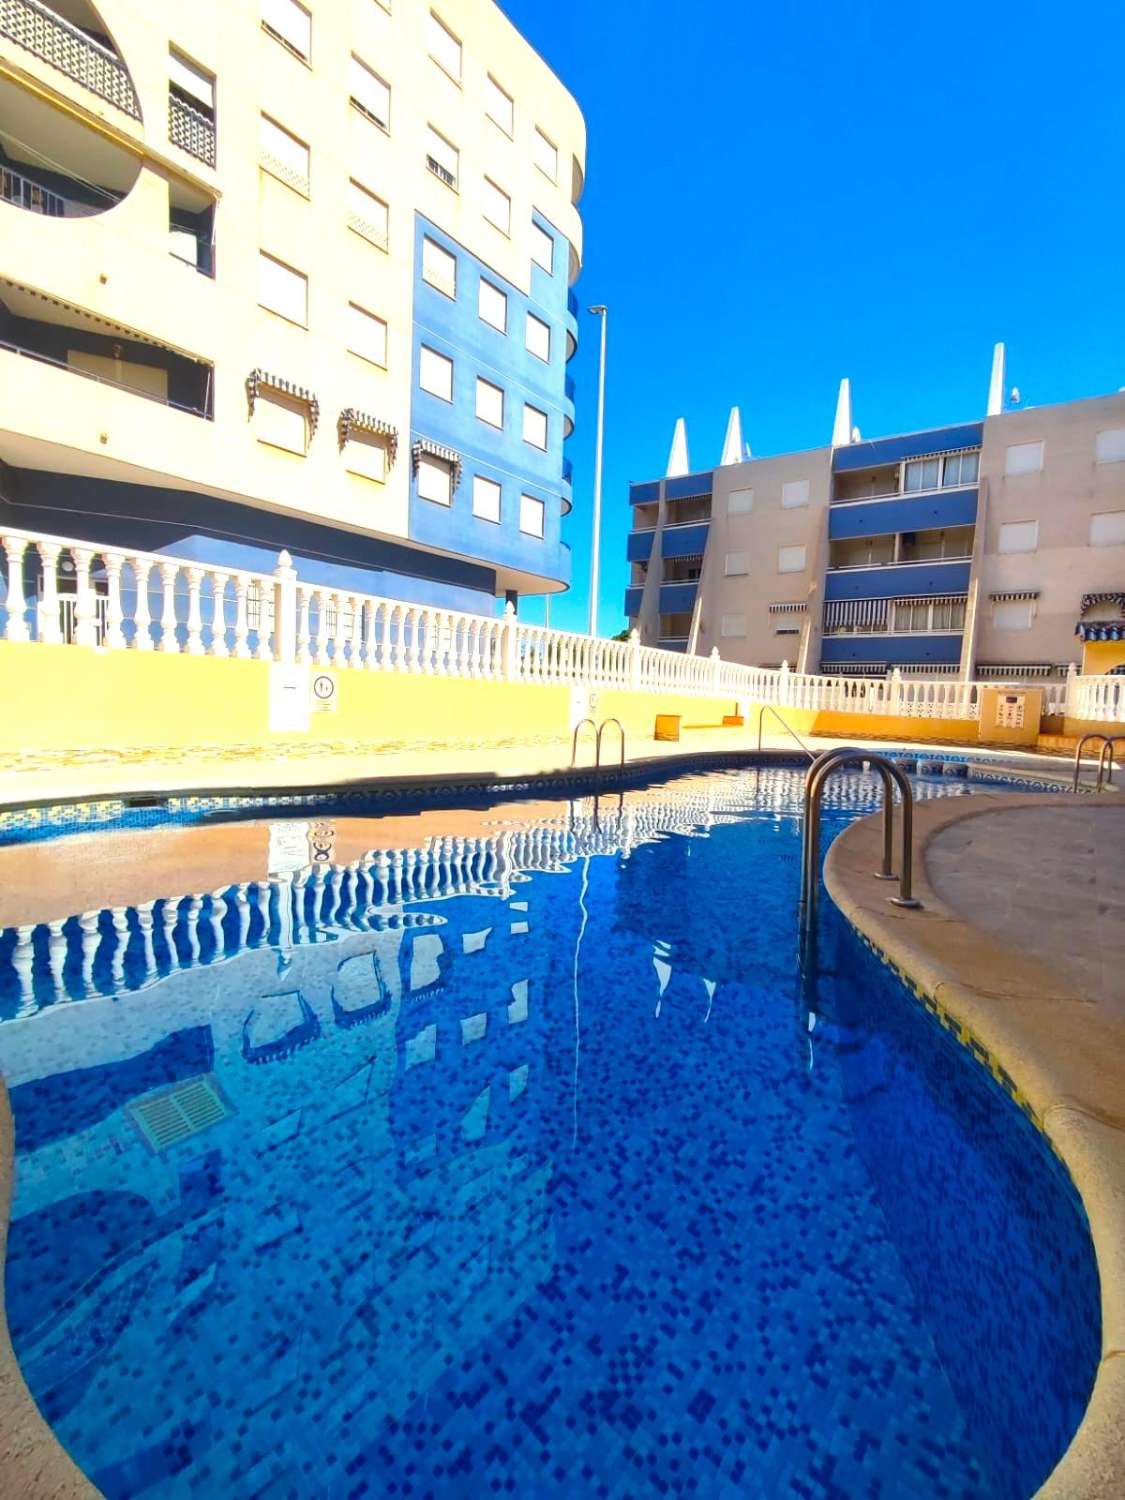 2 BEDROOM APARTMENT WITH POOL AND CLOSE TO THE BEACH